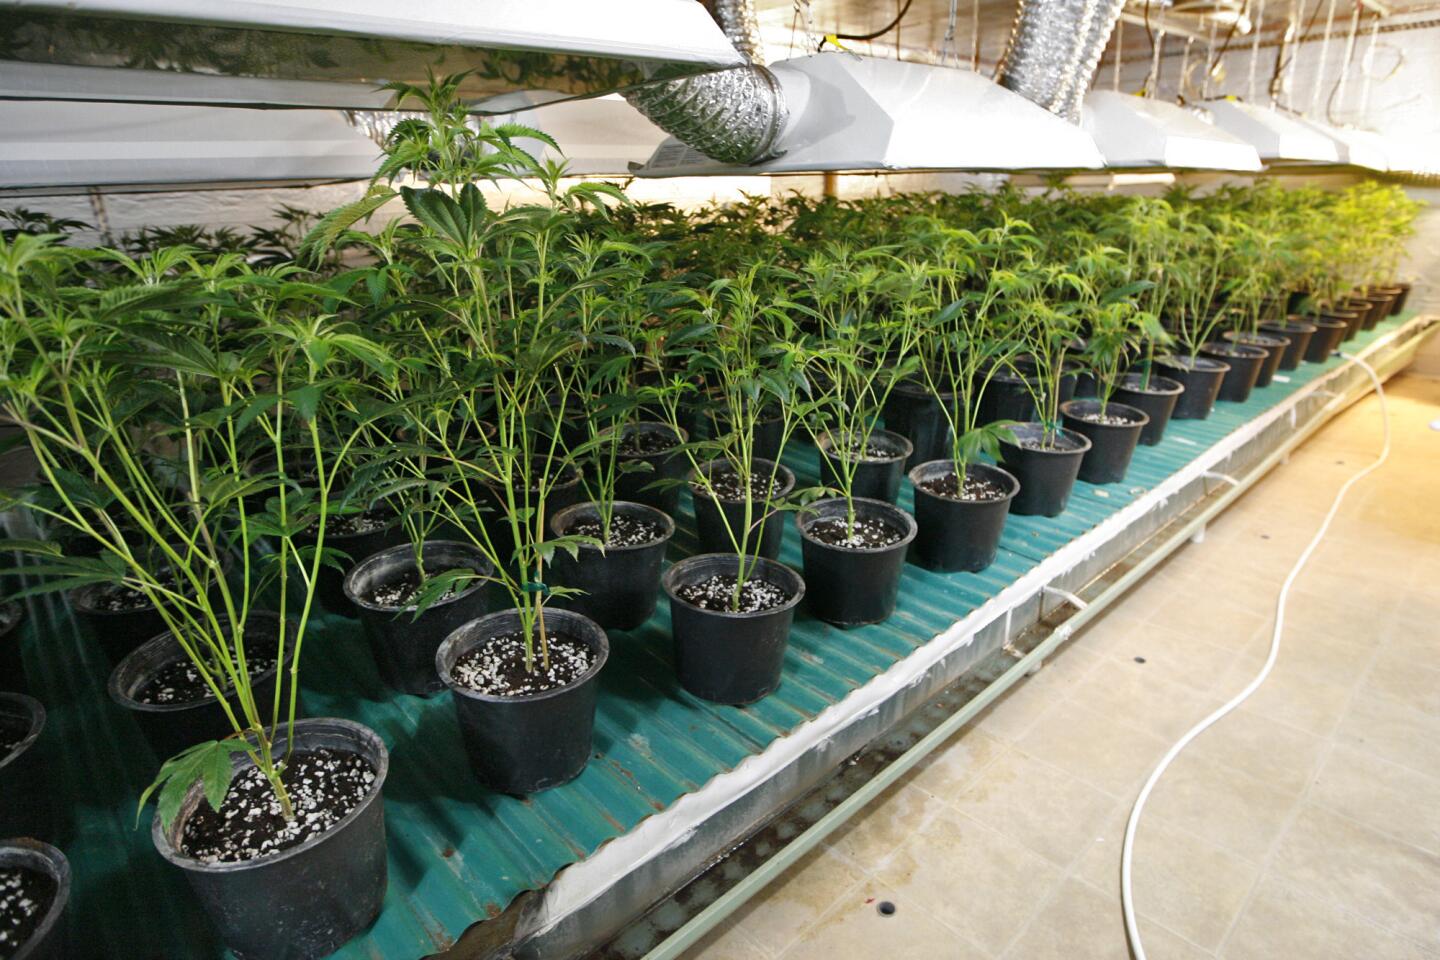 Photo Gallery: Pot growing operation busted